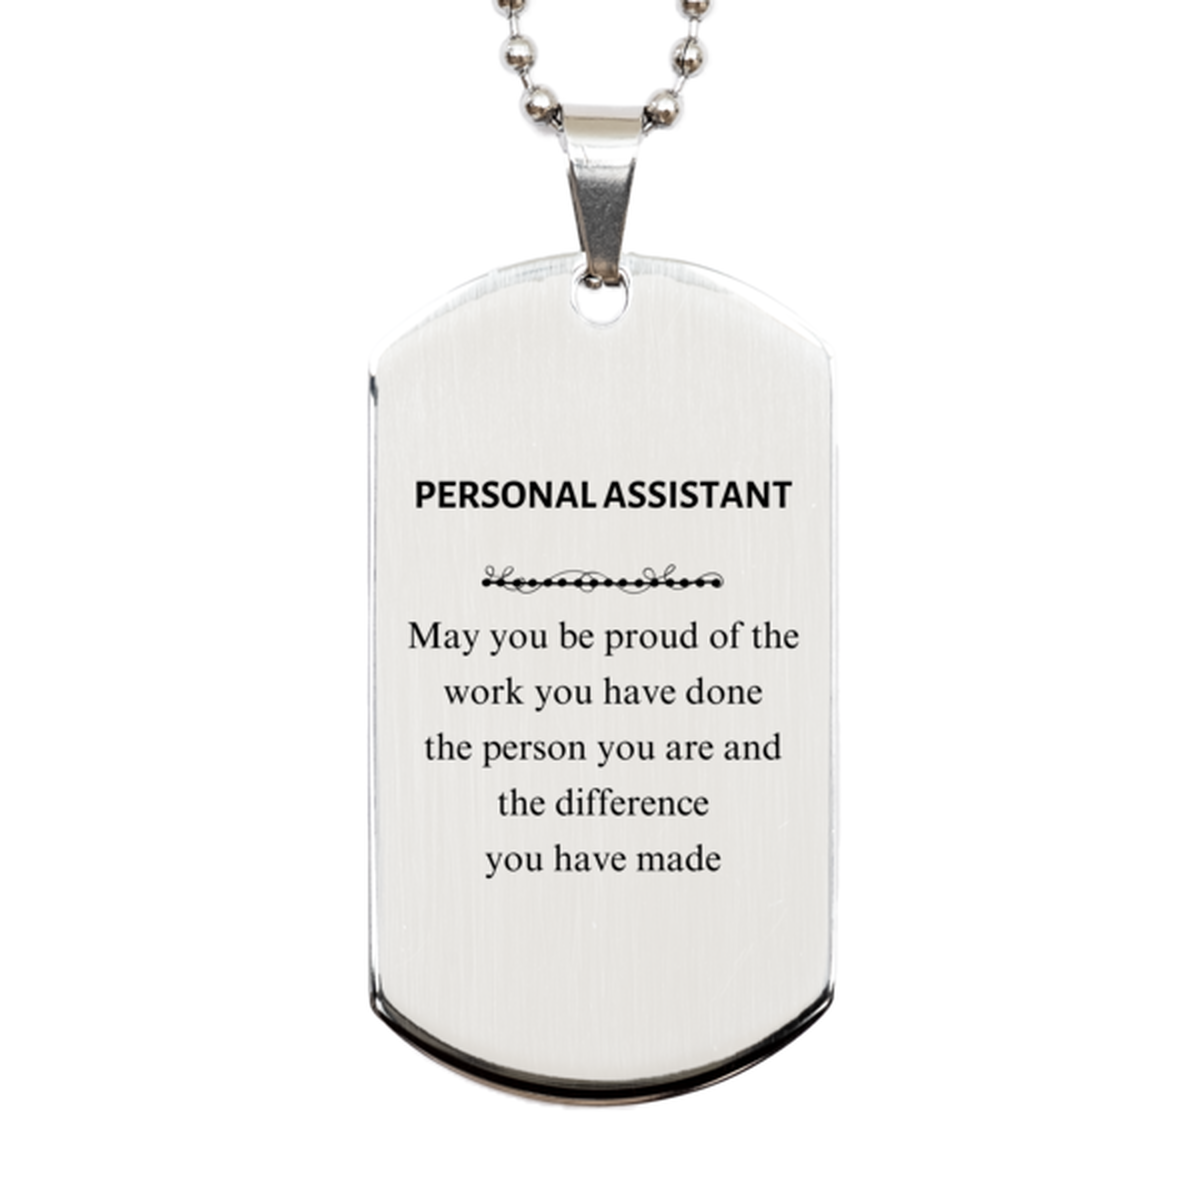 Personal Assistant May you be proud of the work you have done, Retirement Personal Assistant Silver Dog Tag for Colleague Appreciation Gifts Amazing for Personal Assistant